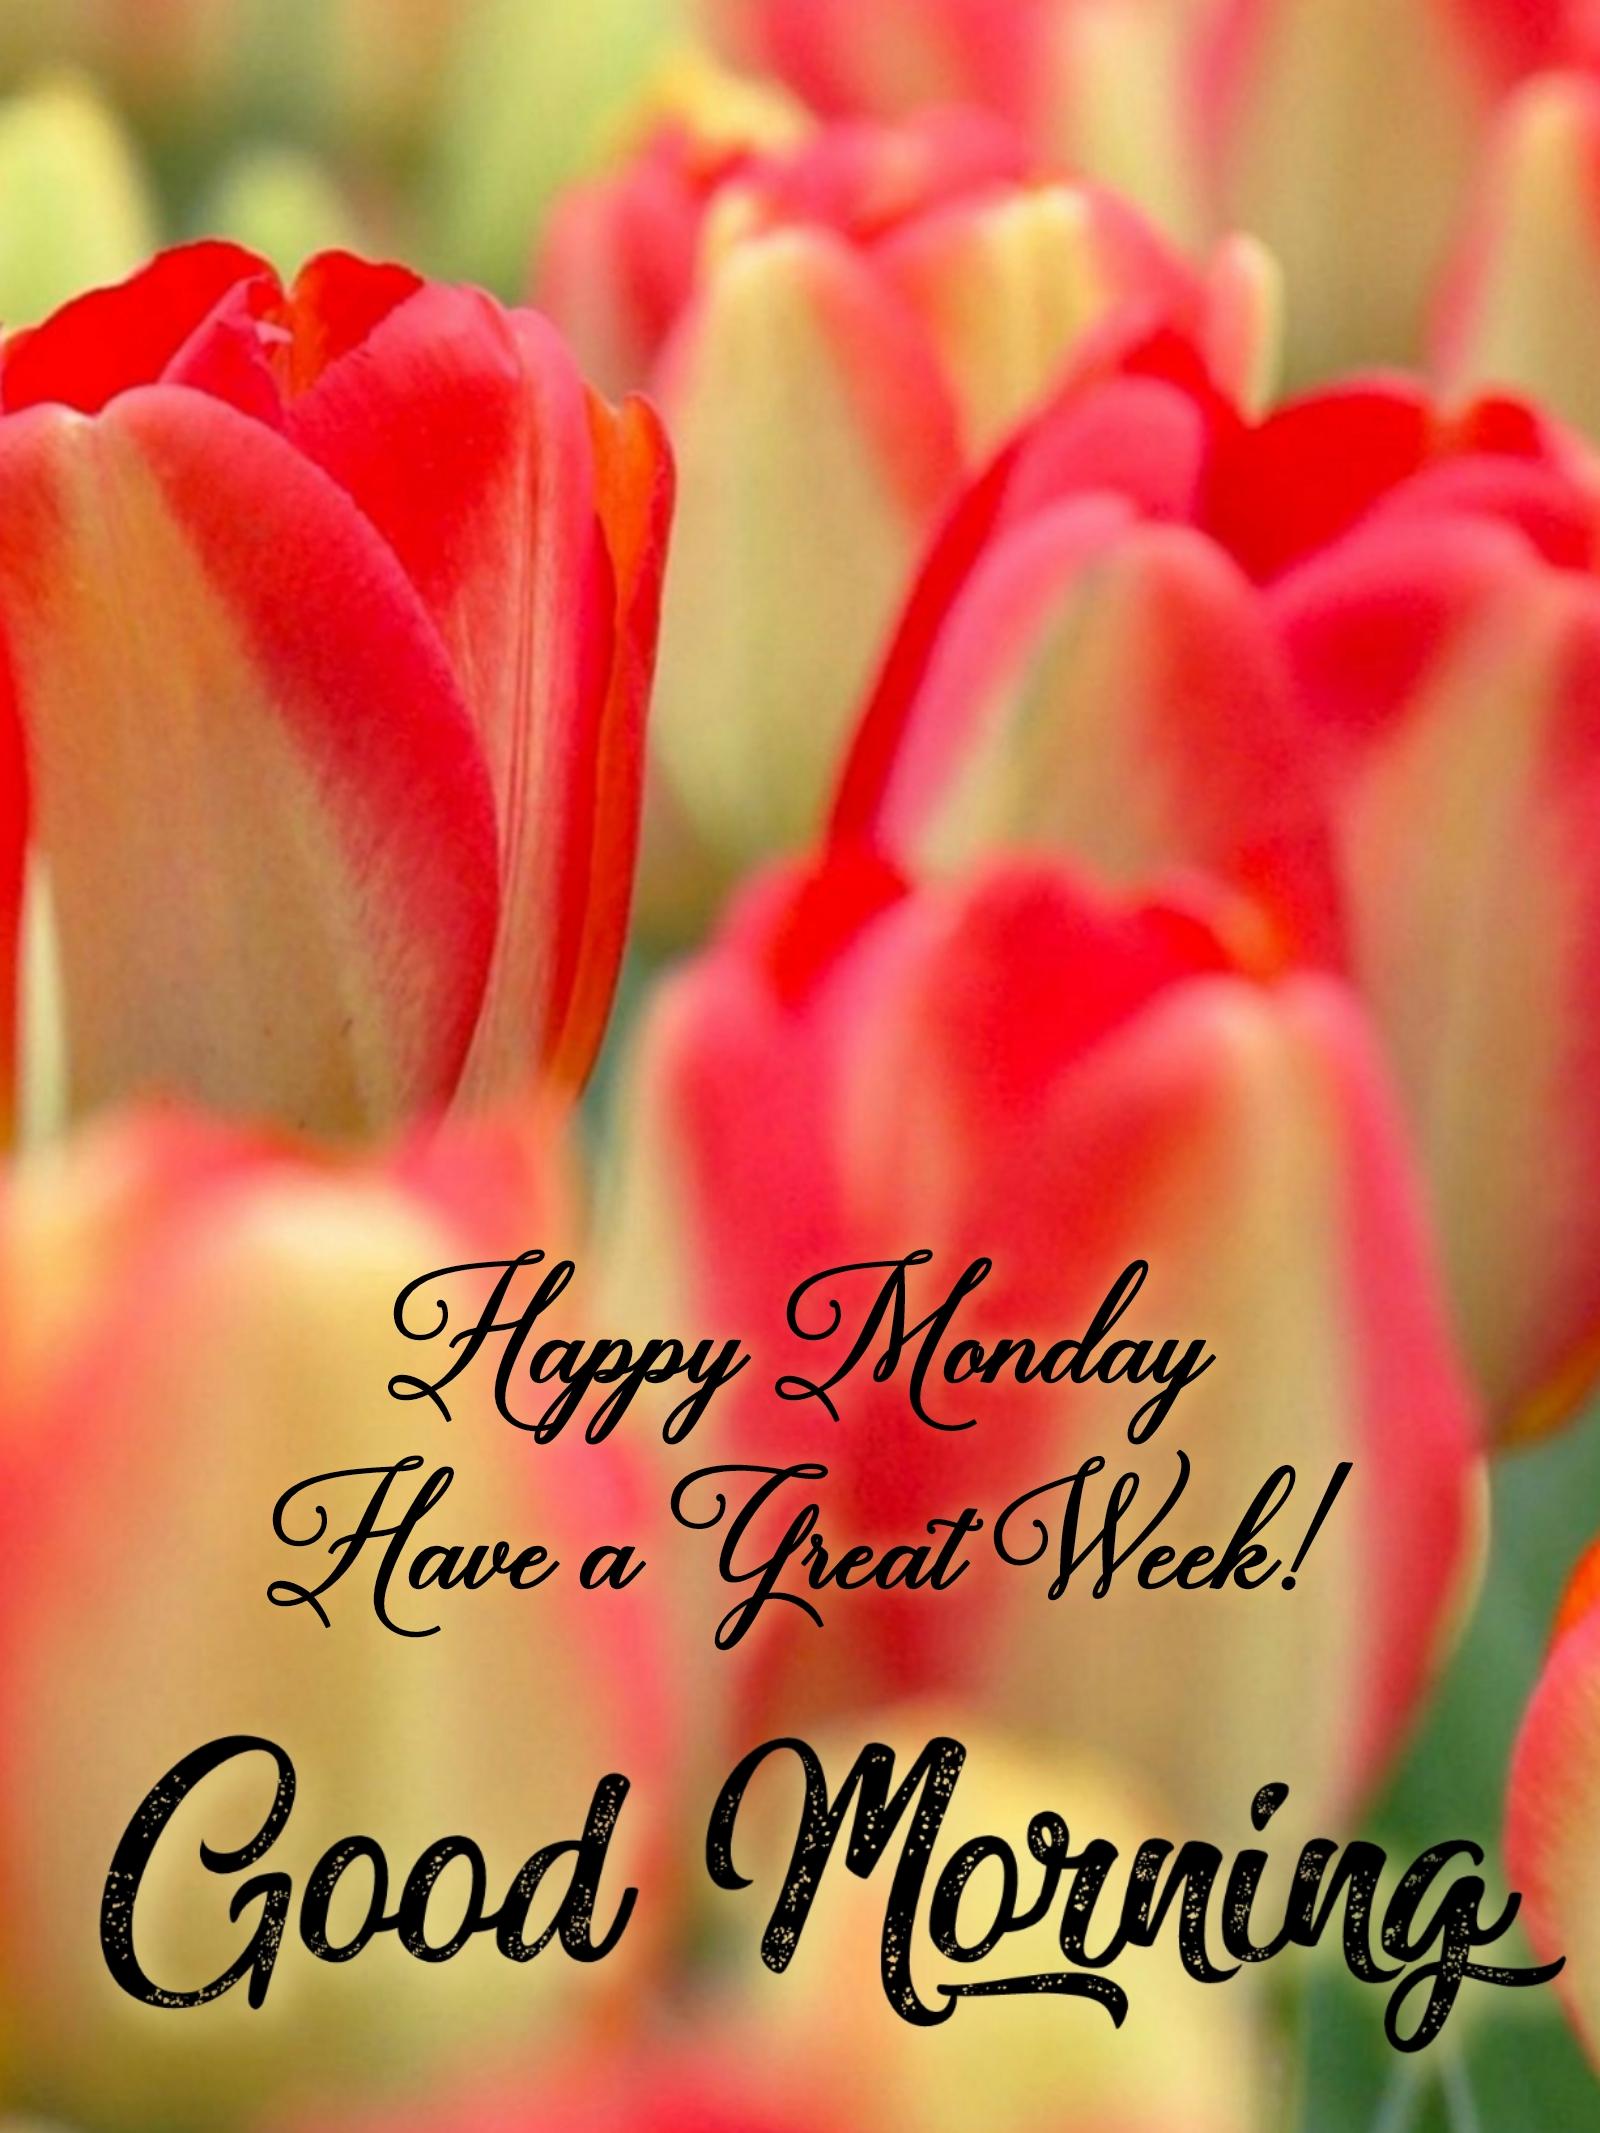 Good Morning Happy Monday Have a Great Week Photos